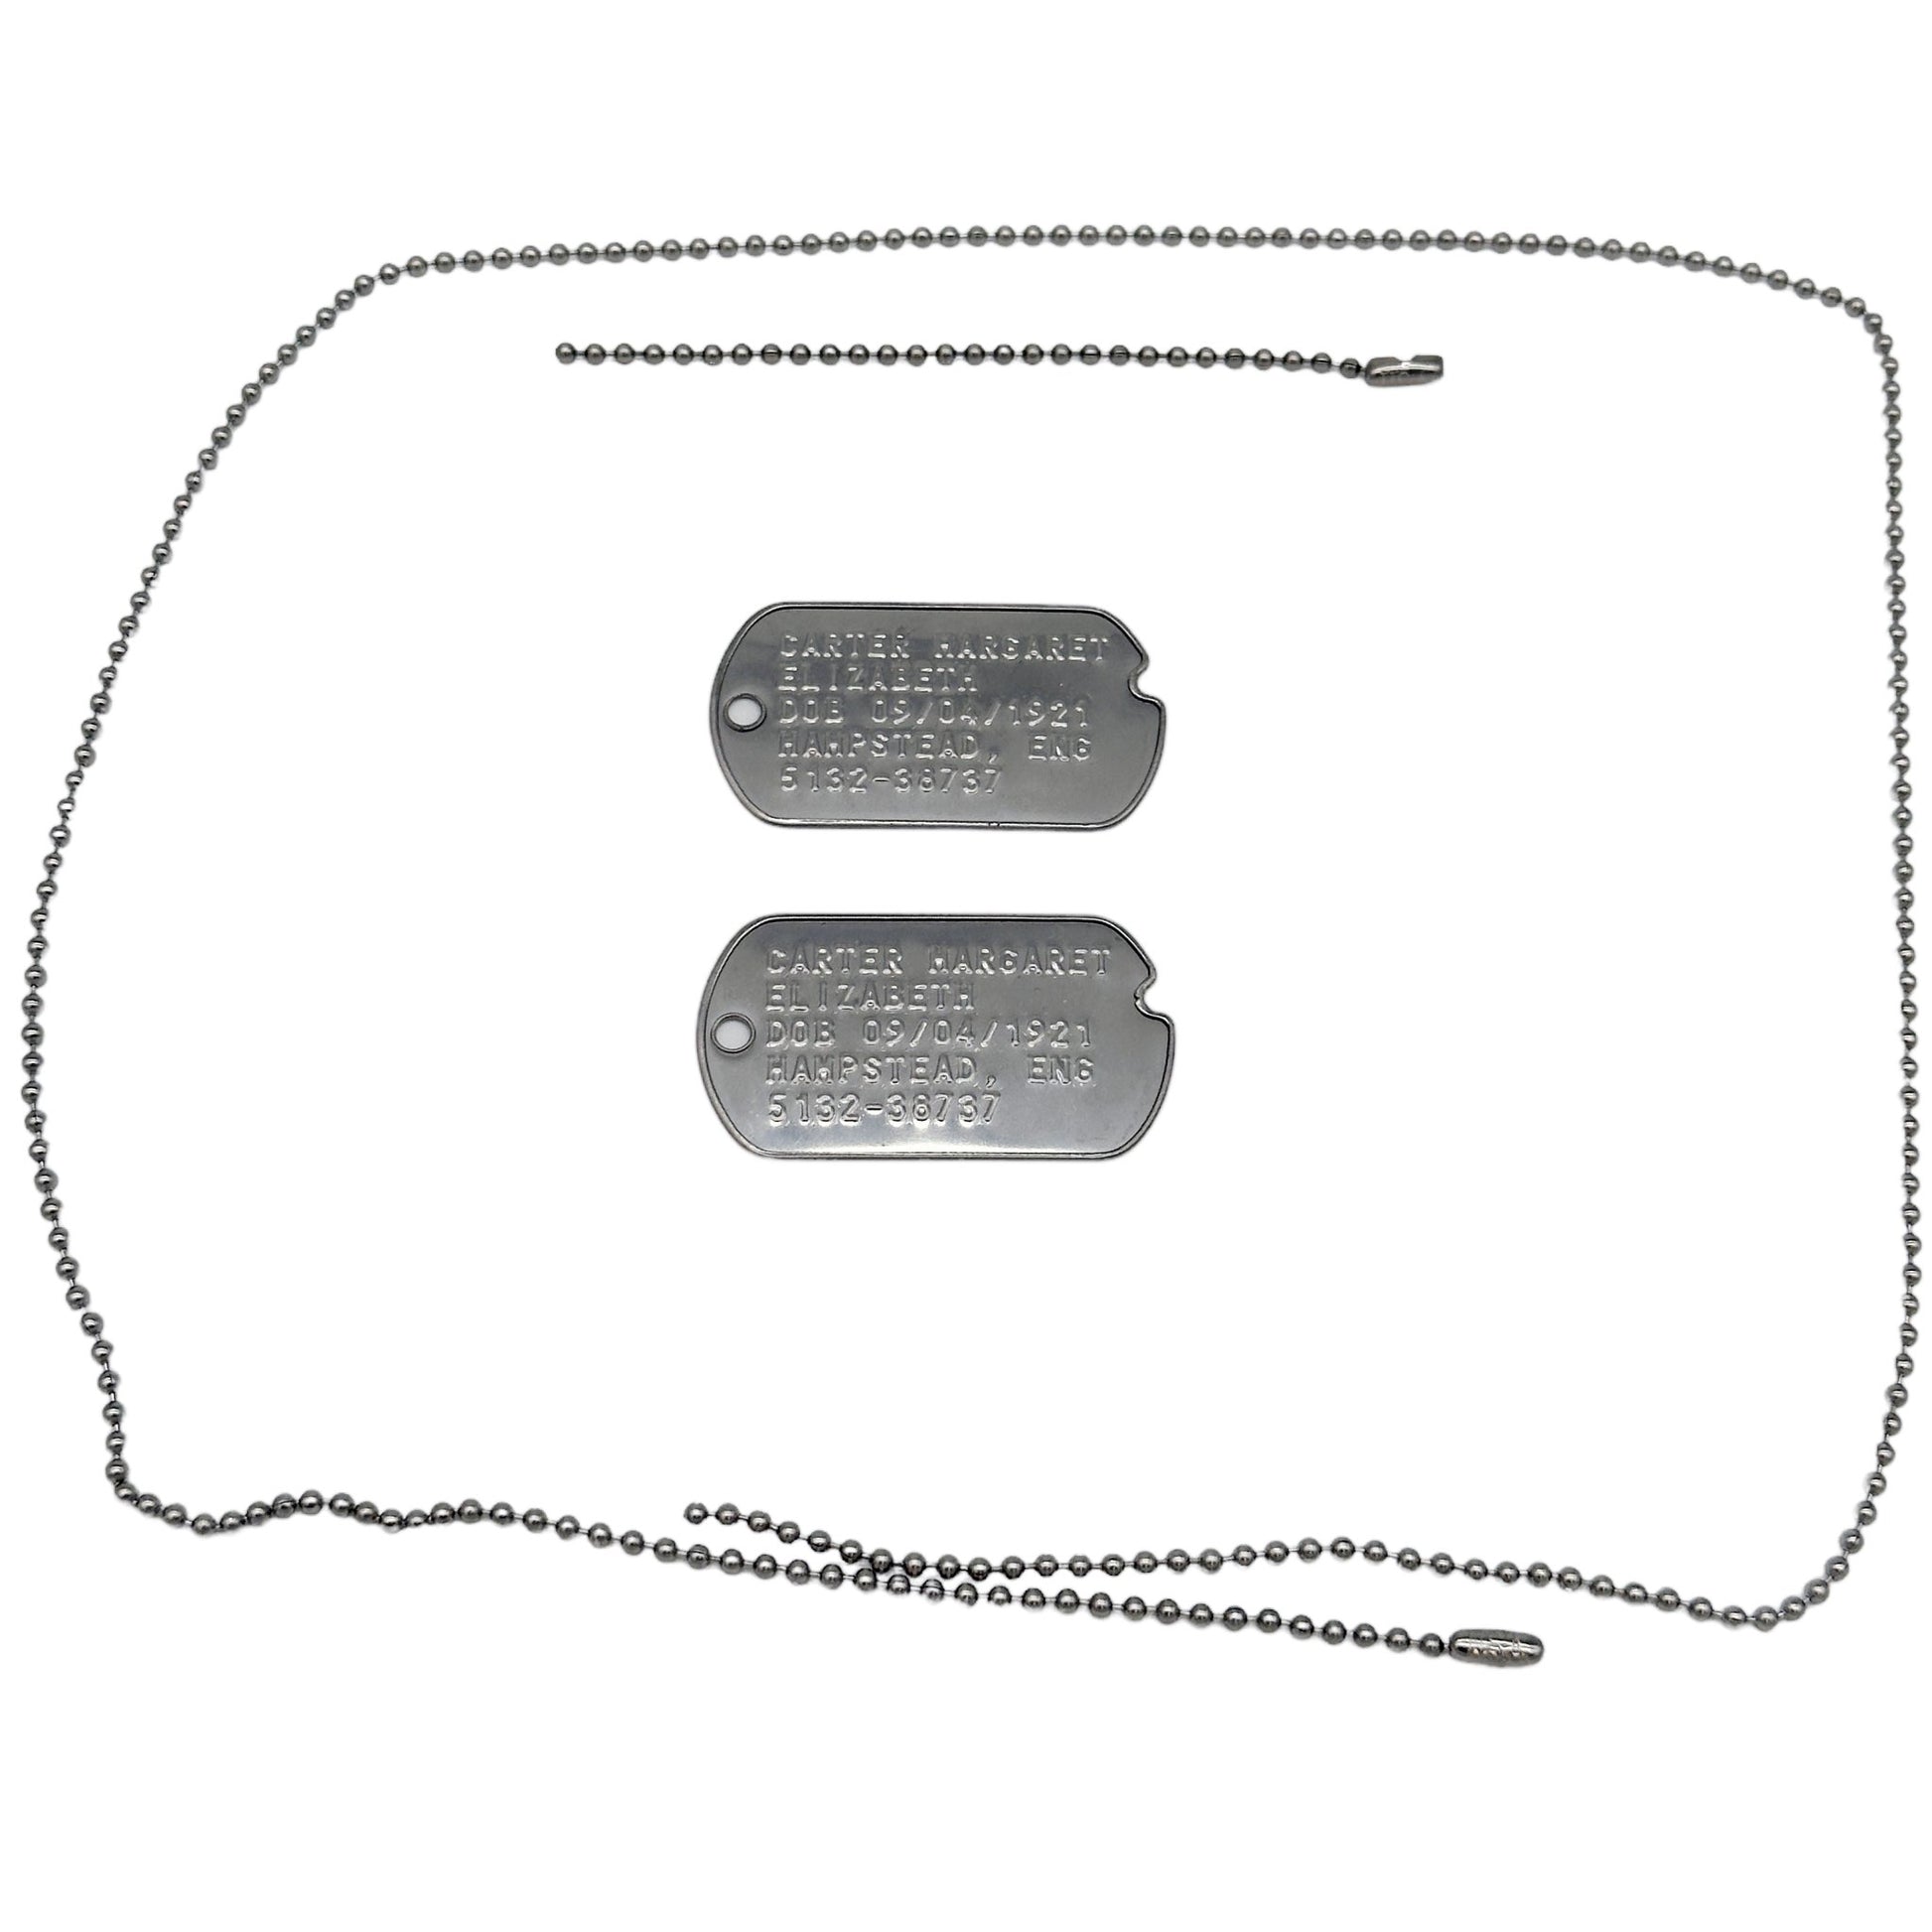 Margaret Elizabeth 'Peggy' Carter WWII Style Military Dog Tags Prop Replica  - Notched pre 1965 WW2 - Stainless Steel - Chain Included, TheDogTagCo